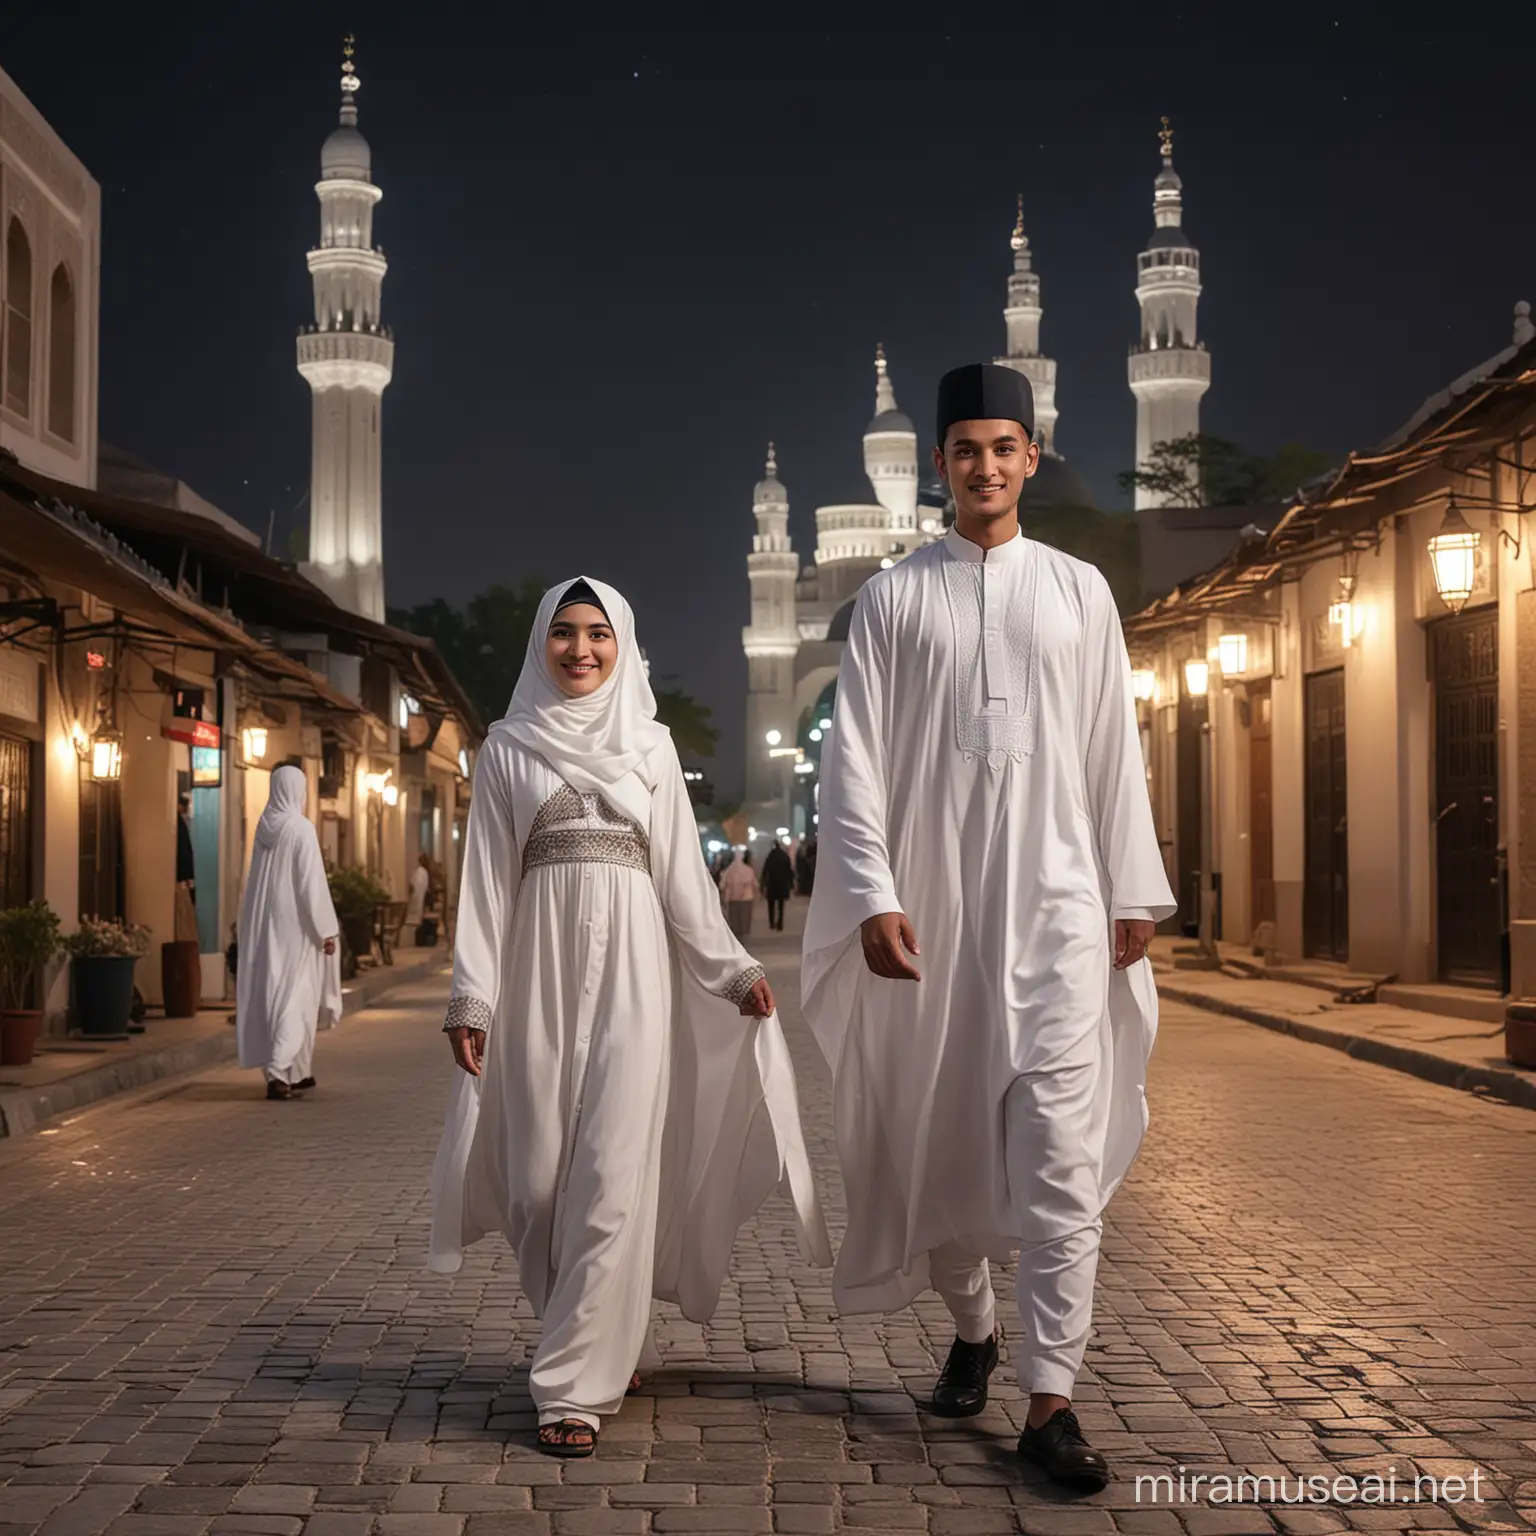 Indonesian Muslim Couple Strolling Through Village Streets at Night